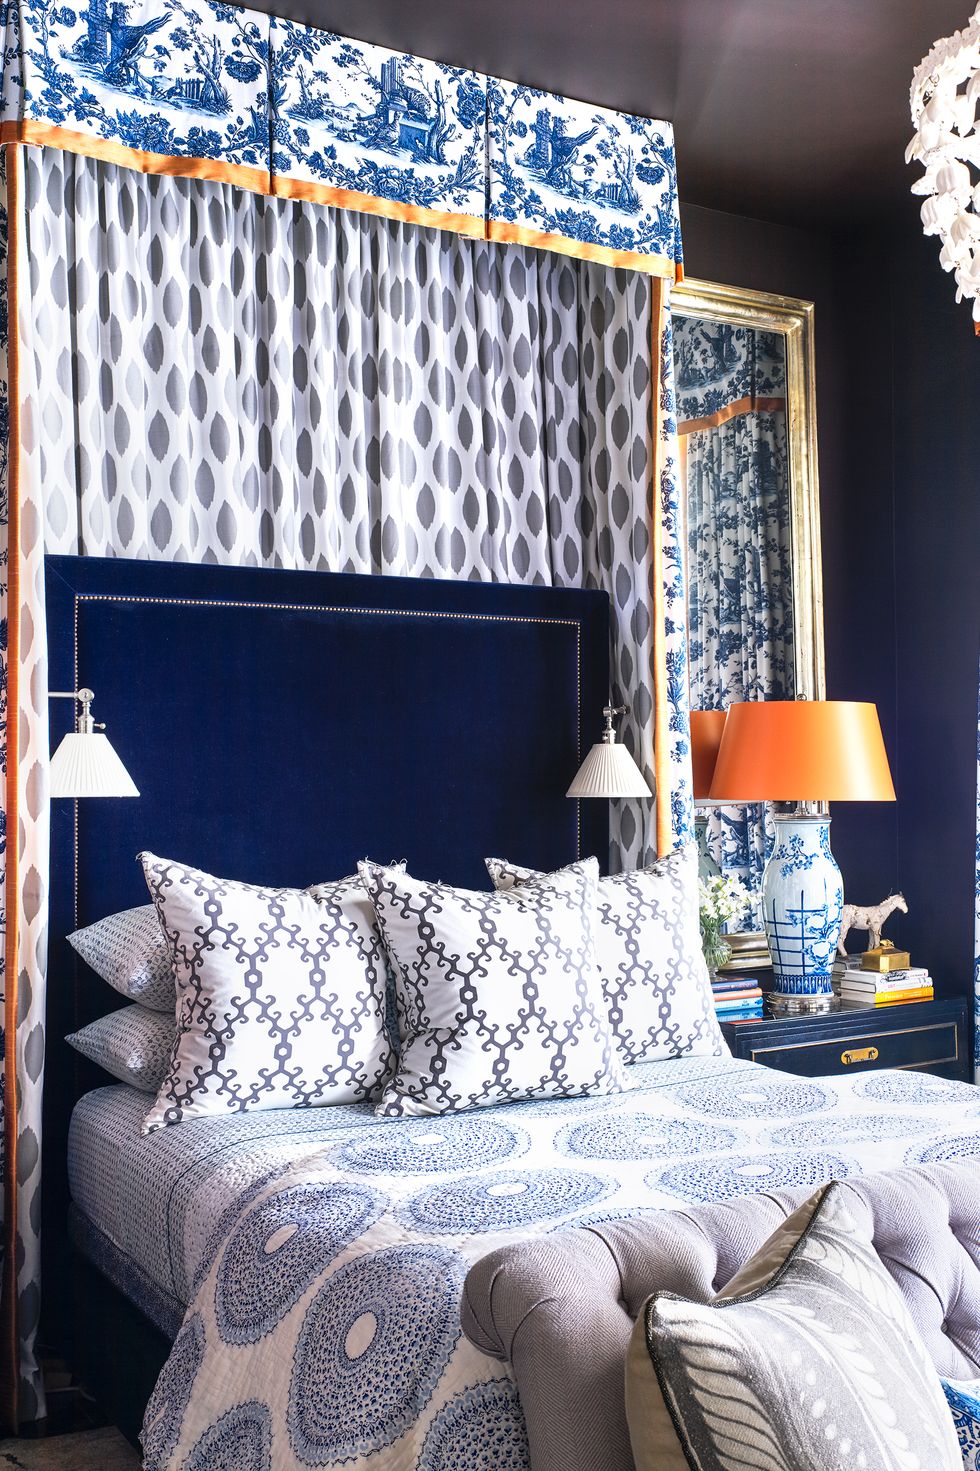 20 Colors That Go With Blue Beautifully - Blue Color Palettes